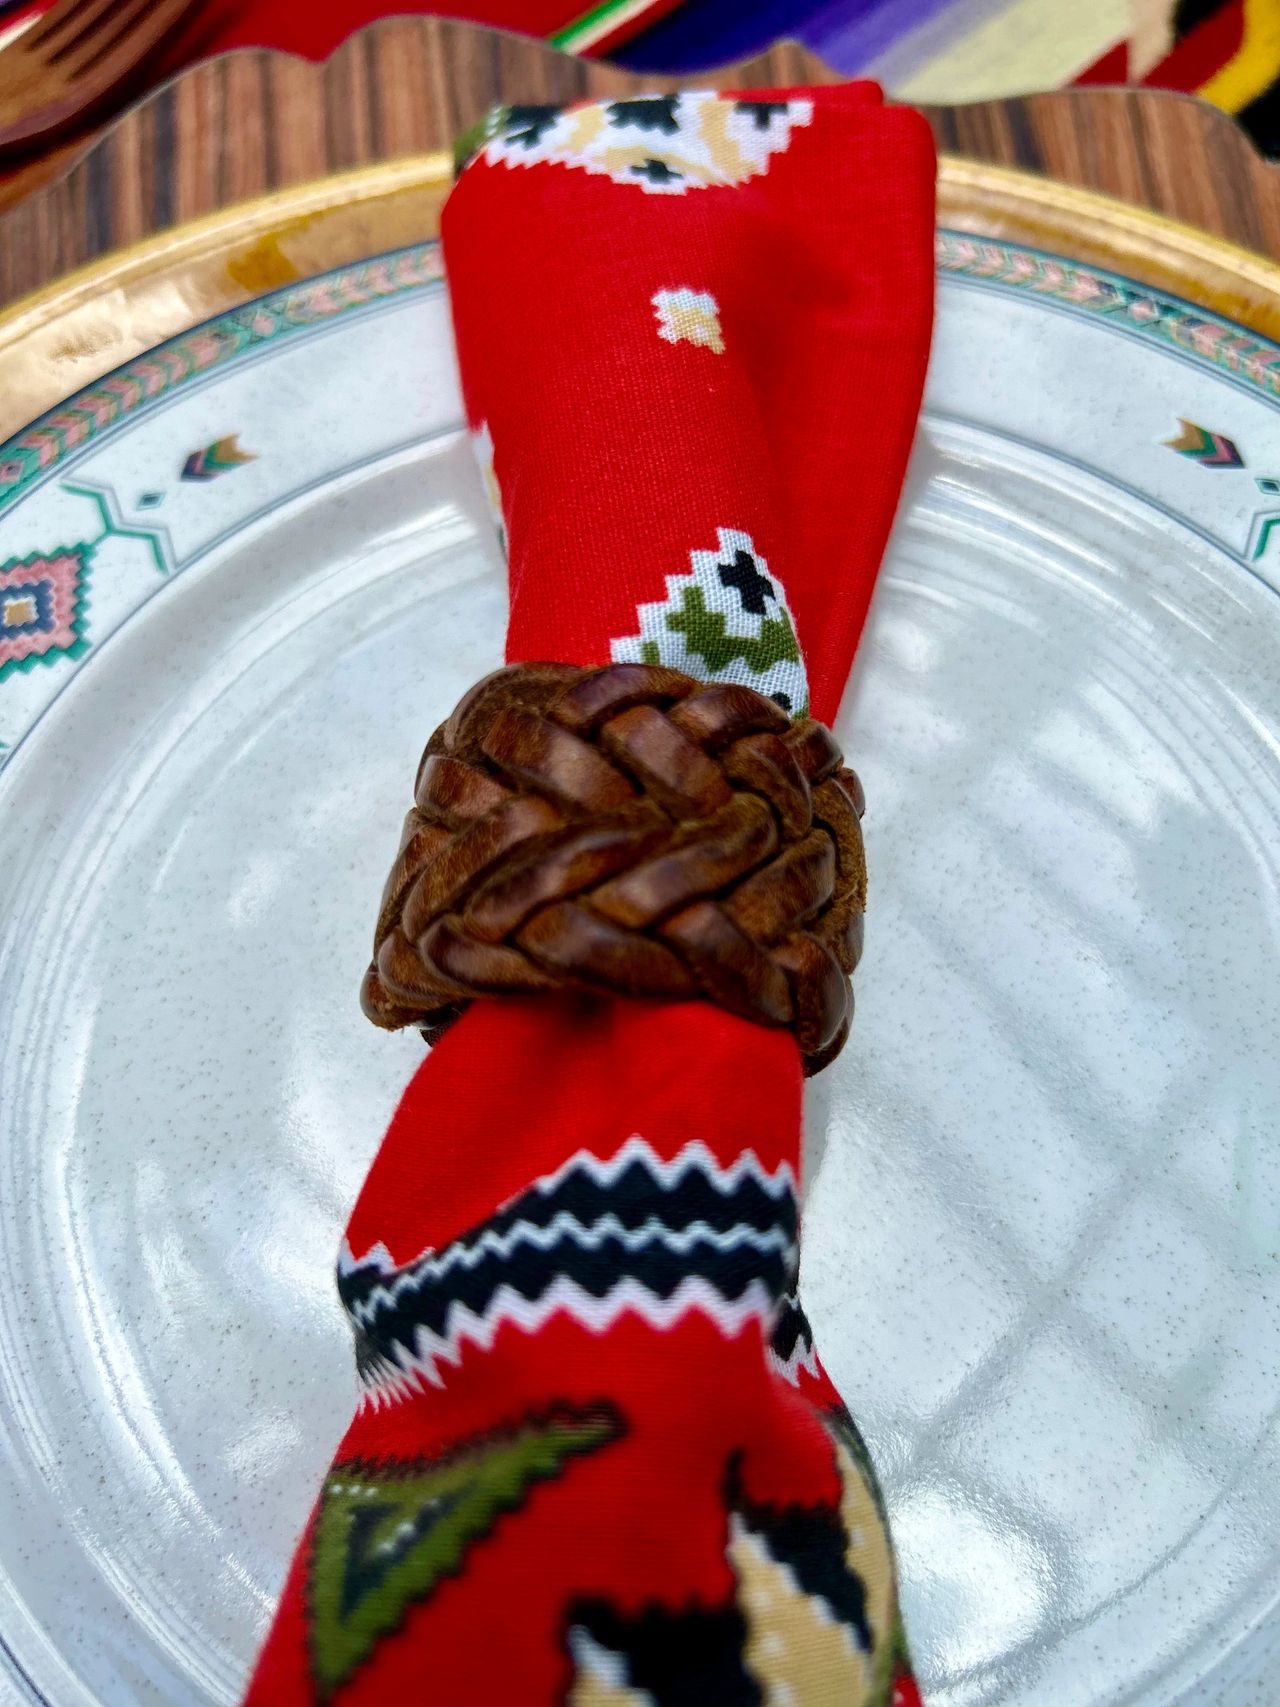 Idea 1: A braided leather belt becomes napkin rings for a Southwest themed dinner party.